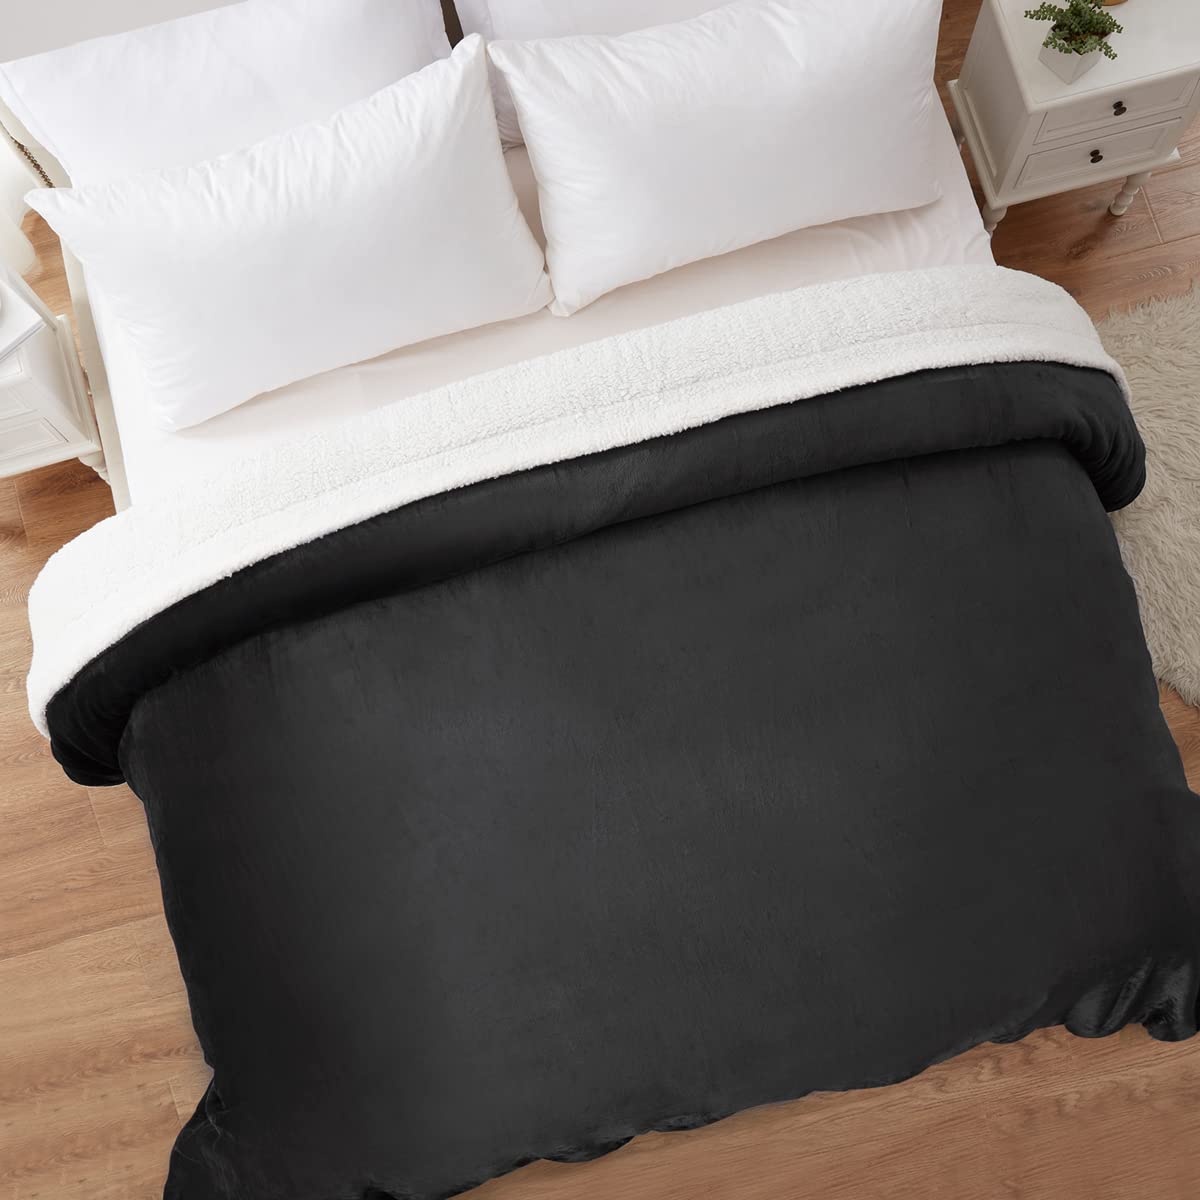 KAWAHOME Sherpa Fleece Blanket King Size Winter Super Soft Extra Warmest and Heavy Thick Winter 500GSM Bed Blankets